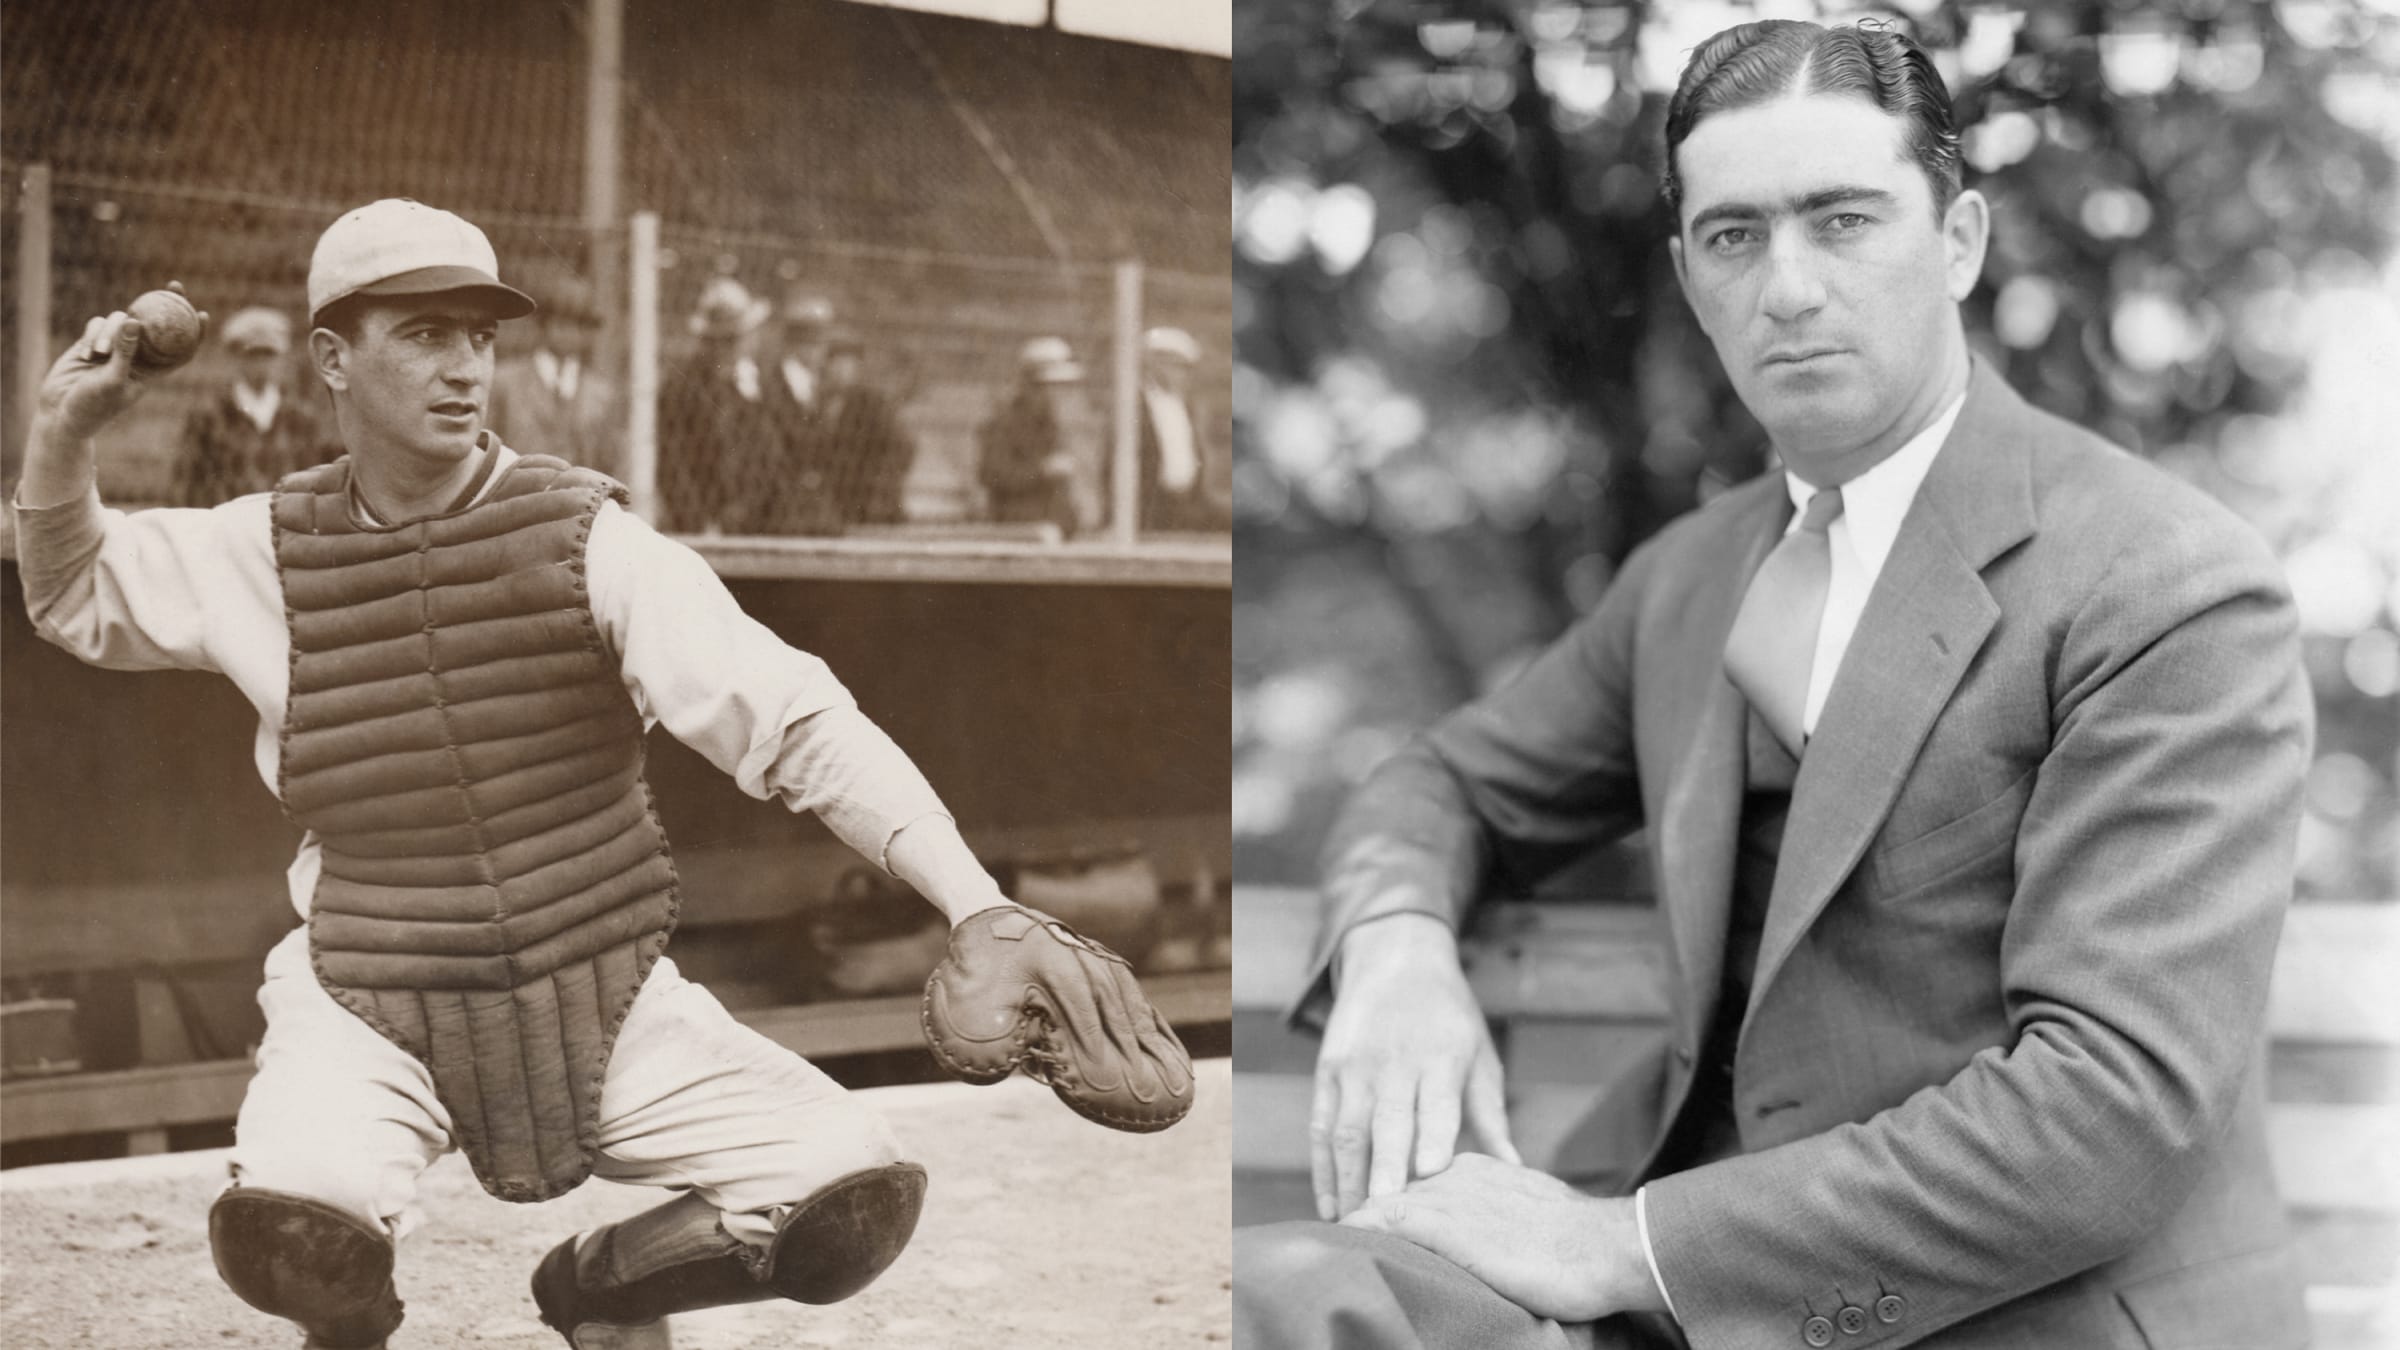 The Spy Behind Home Plate': Moe Berg, the Boston Red Sox Catcher